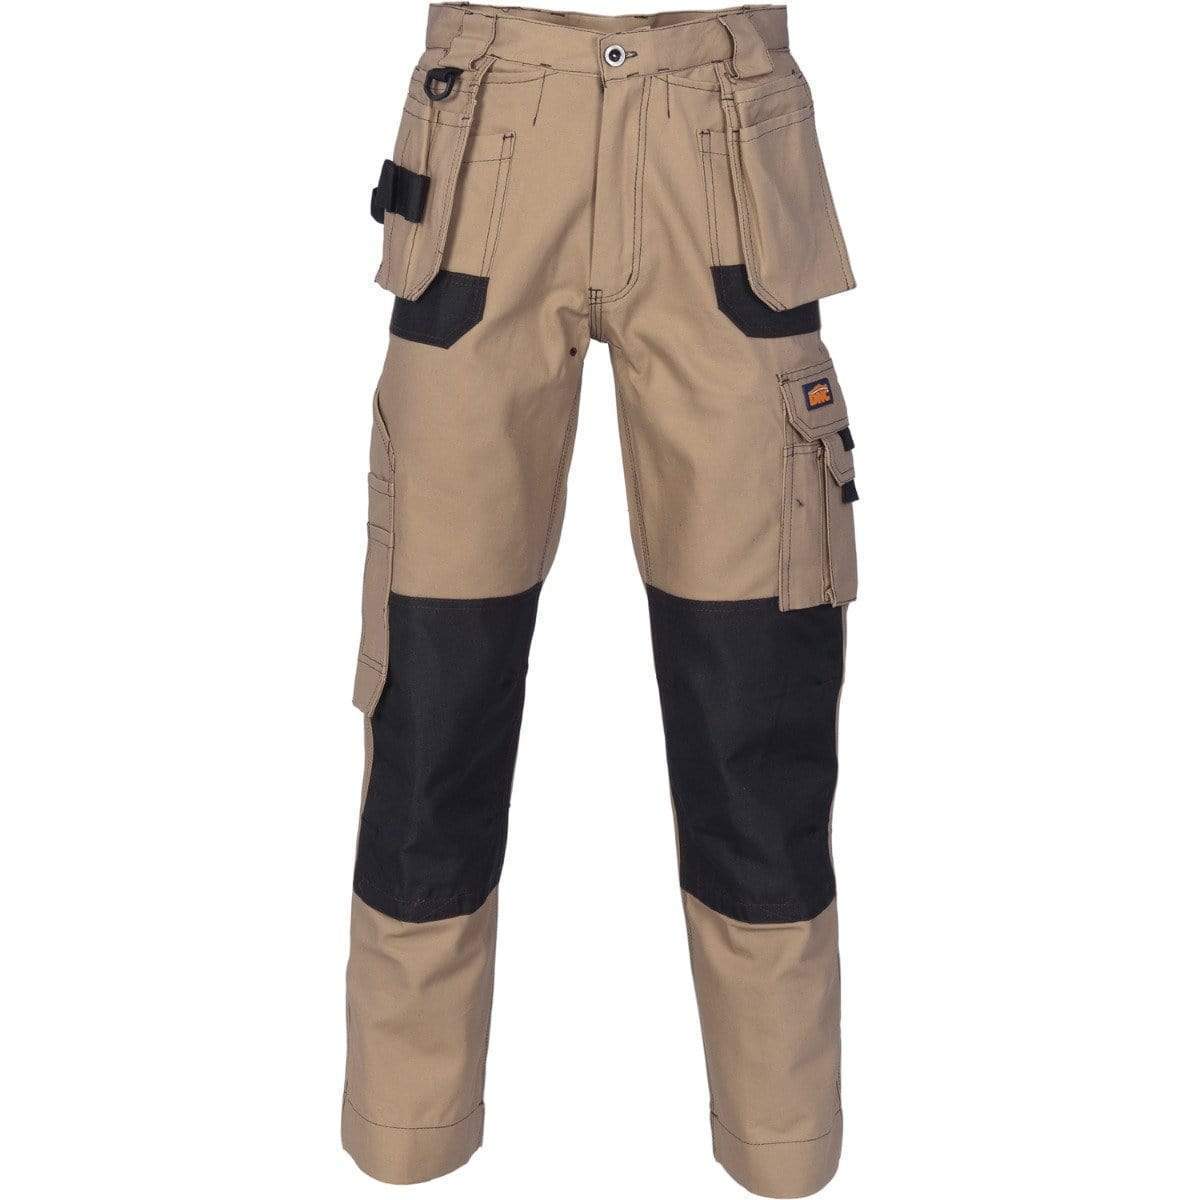 Dnc Workwear Duratex Cotton Duck Weave Tradies Cargo Pants With Twin Holster Tool Pocket - Knee Pads Not Included - 3337 Work Wear DNC Workwear Desert Sand 72R 